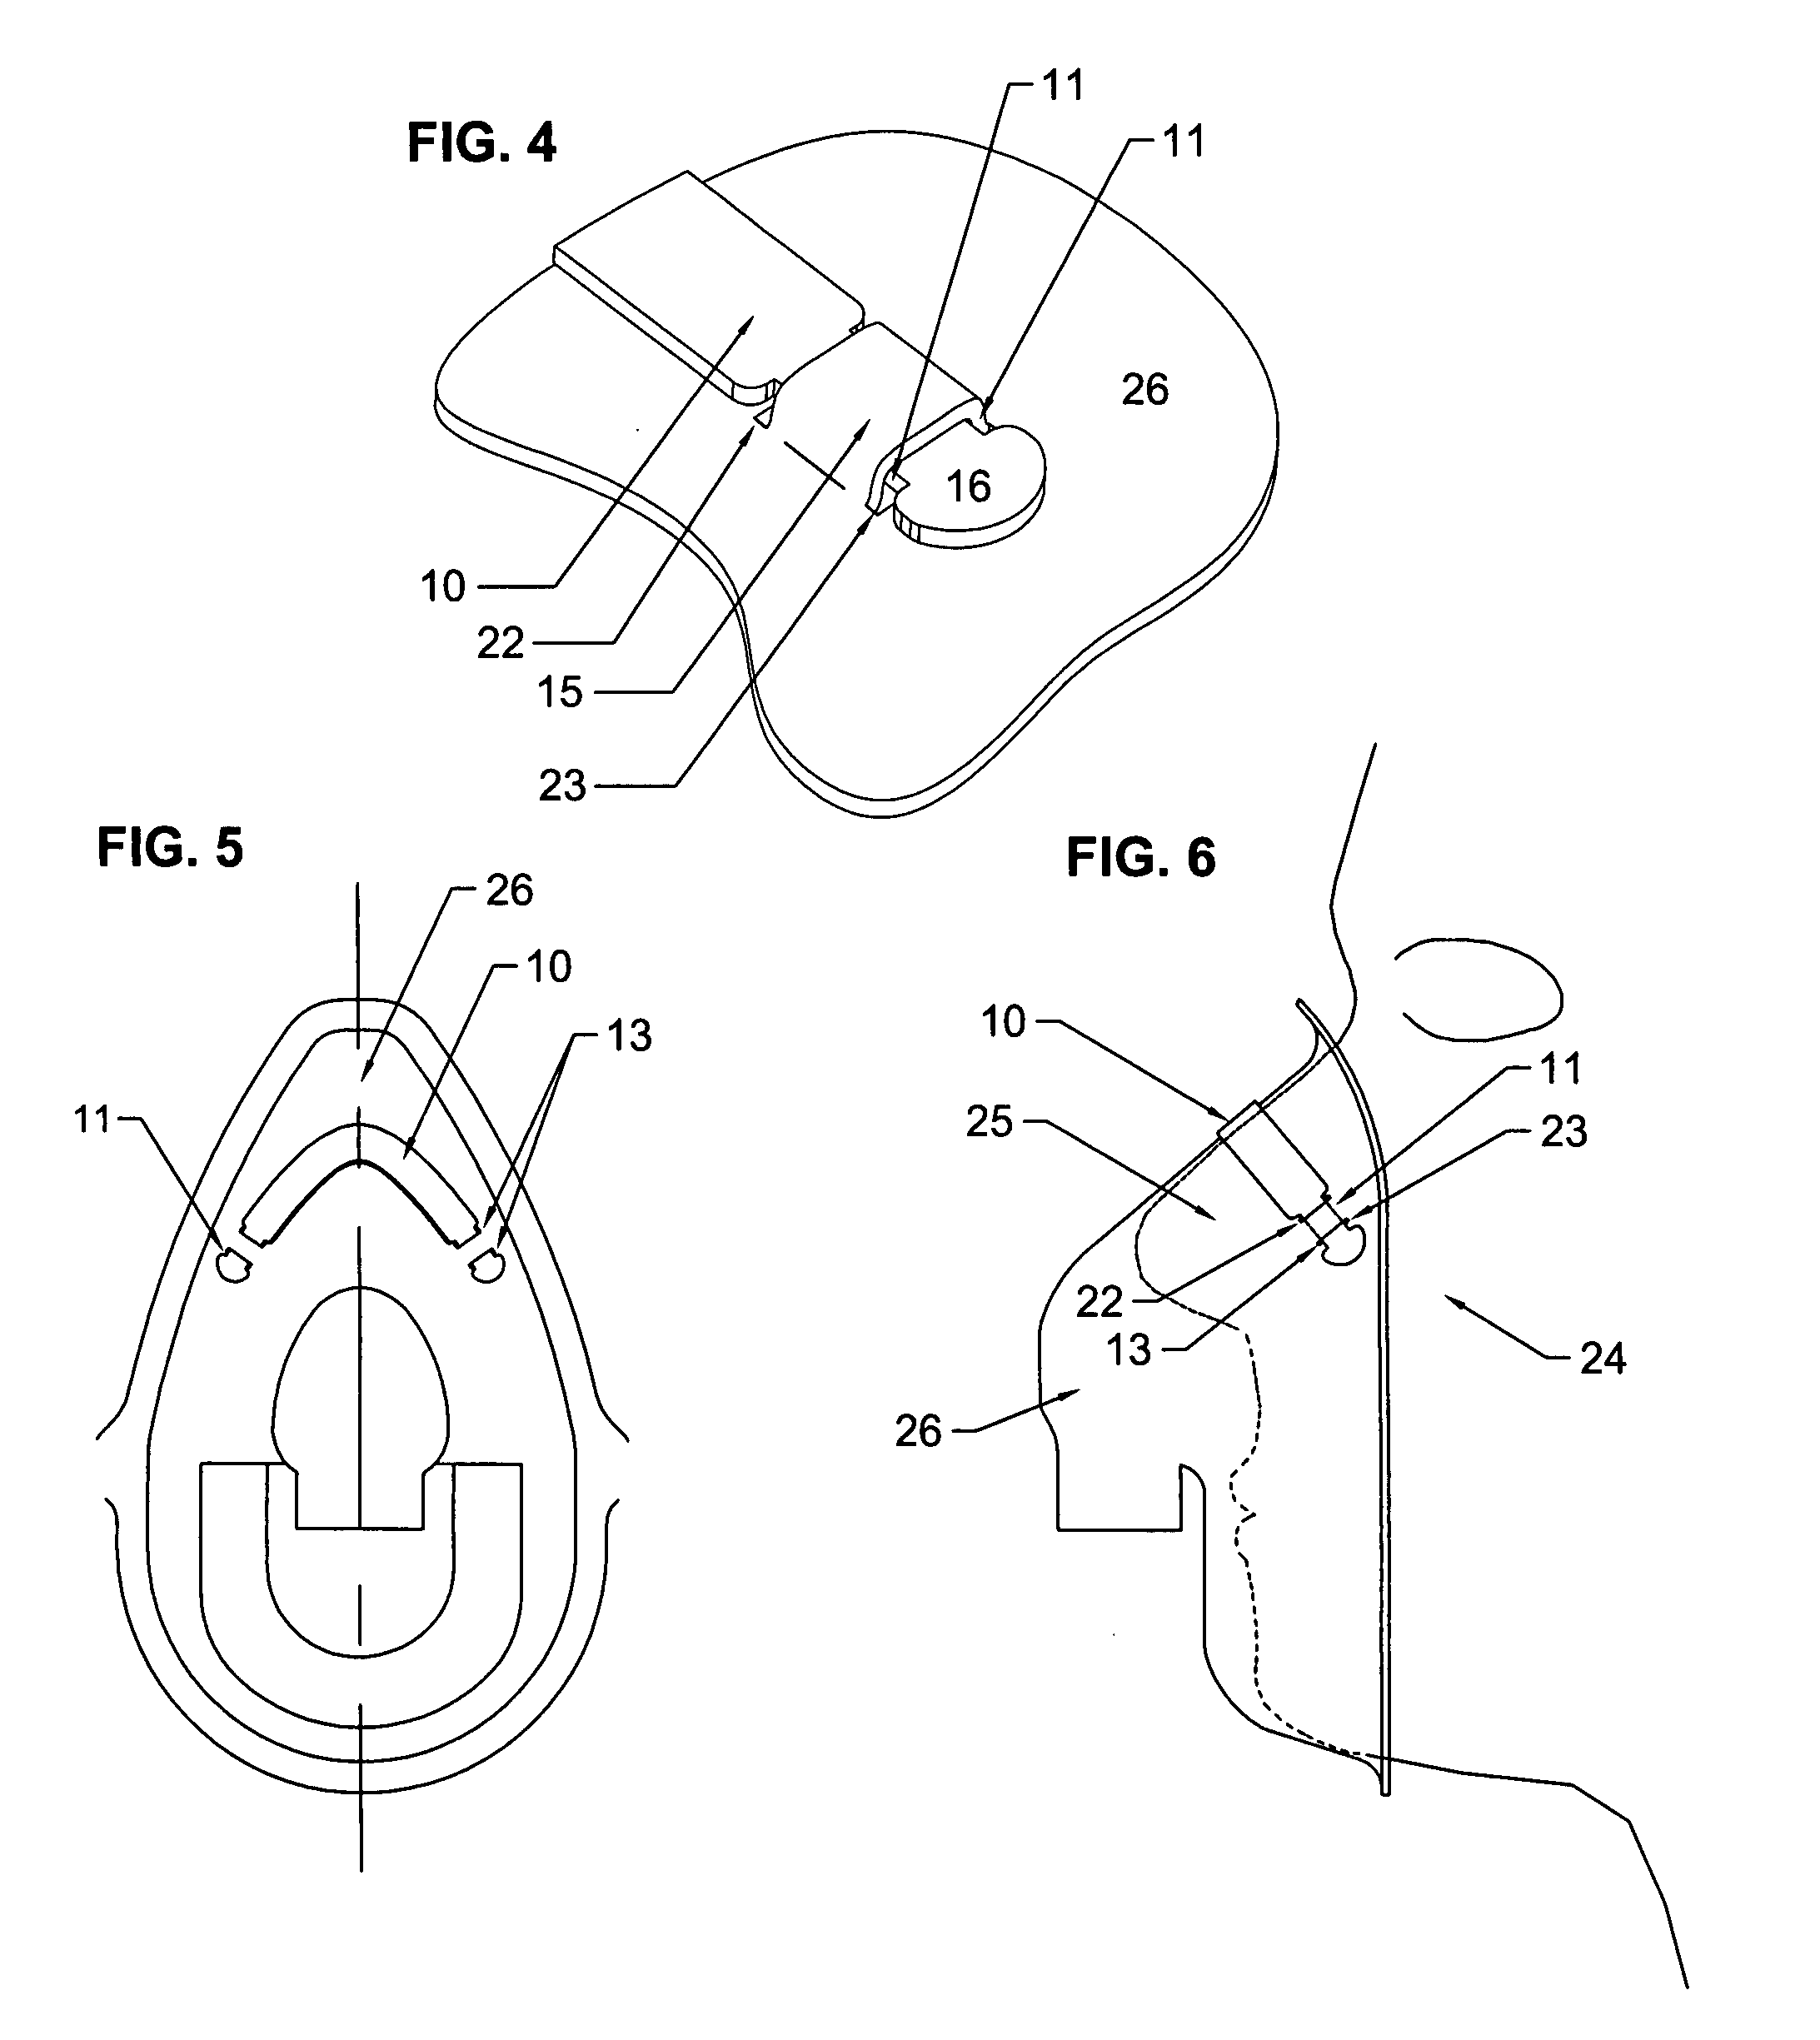 Attachment of a bridge band to an oxygen mask